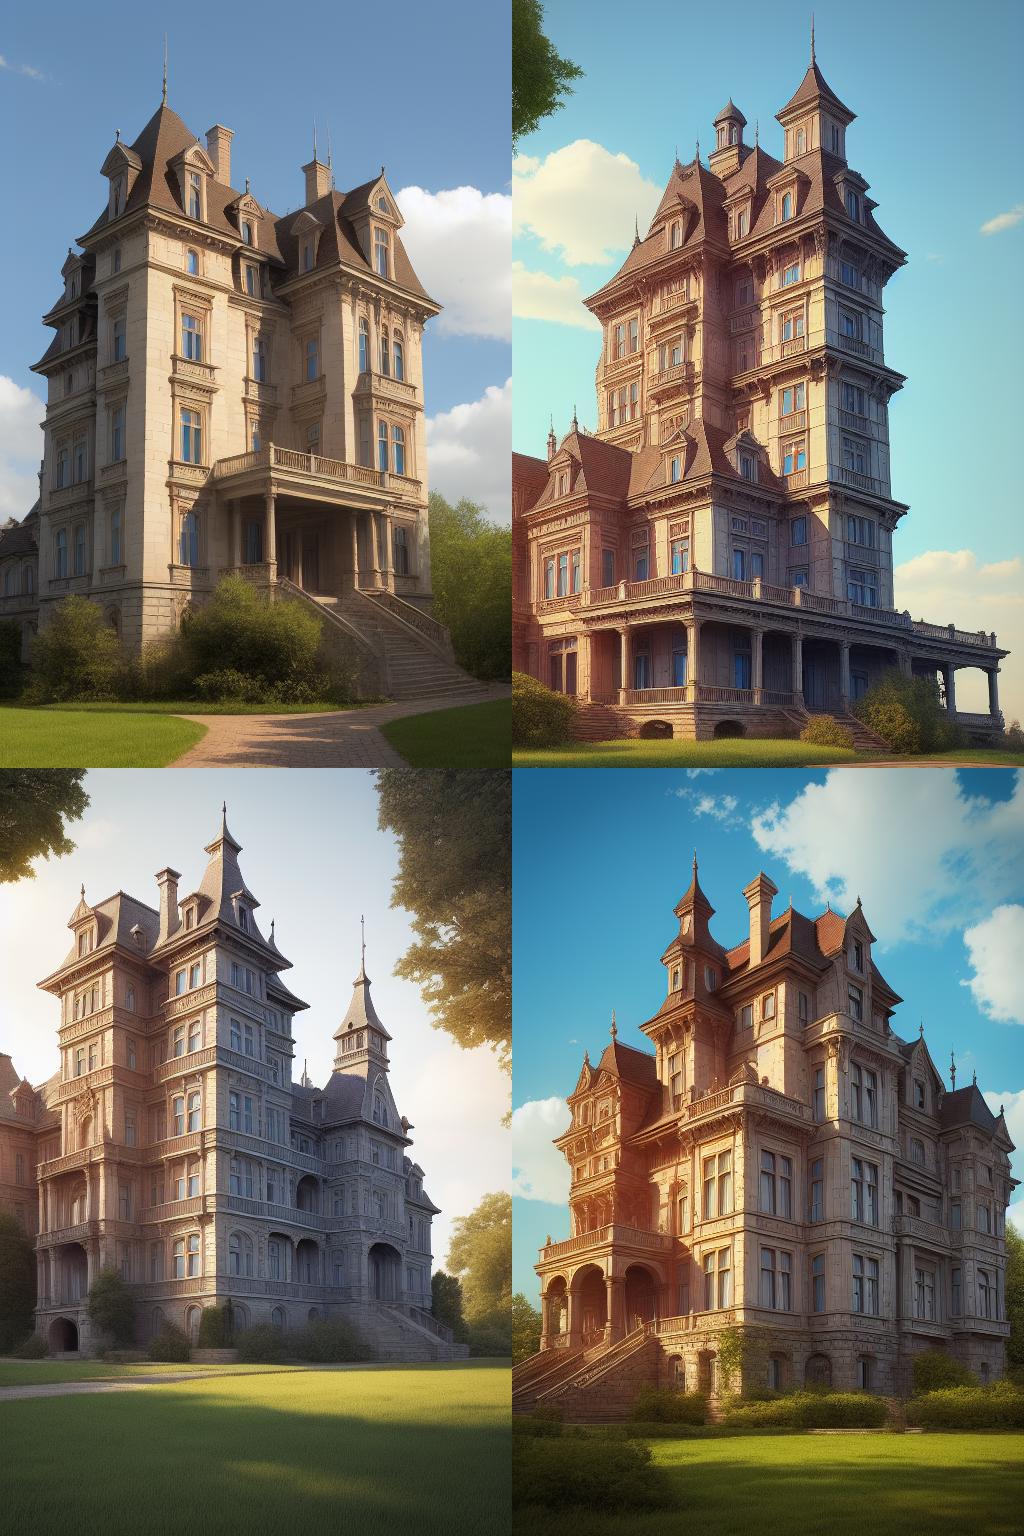 Palace_house image by OsTri